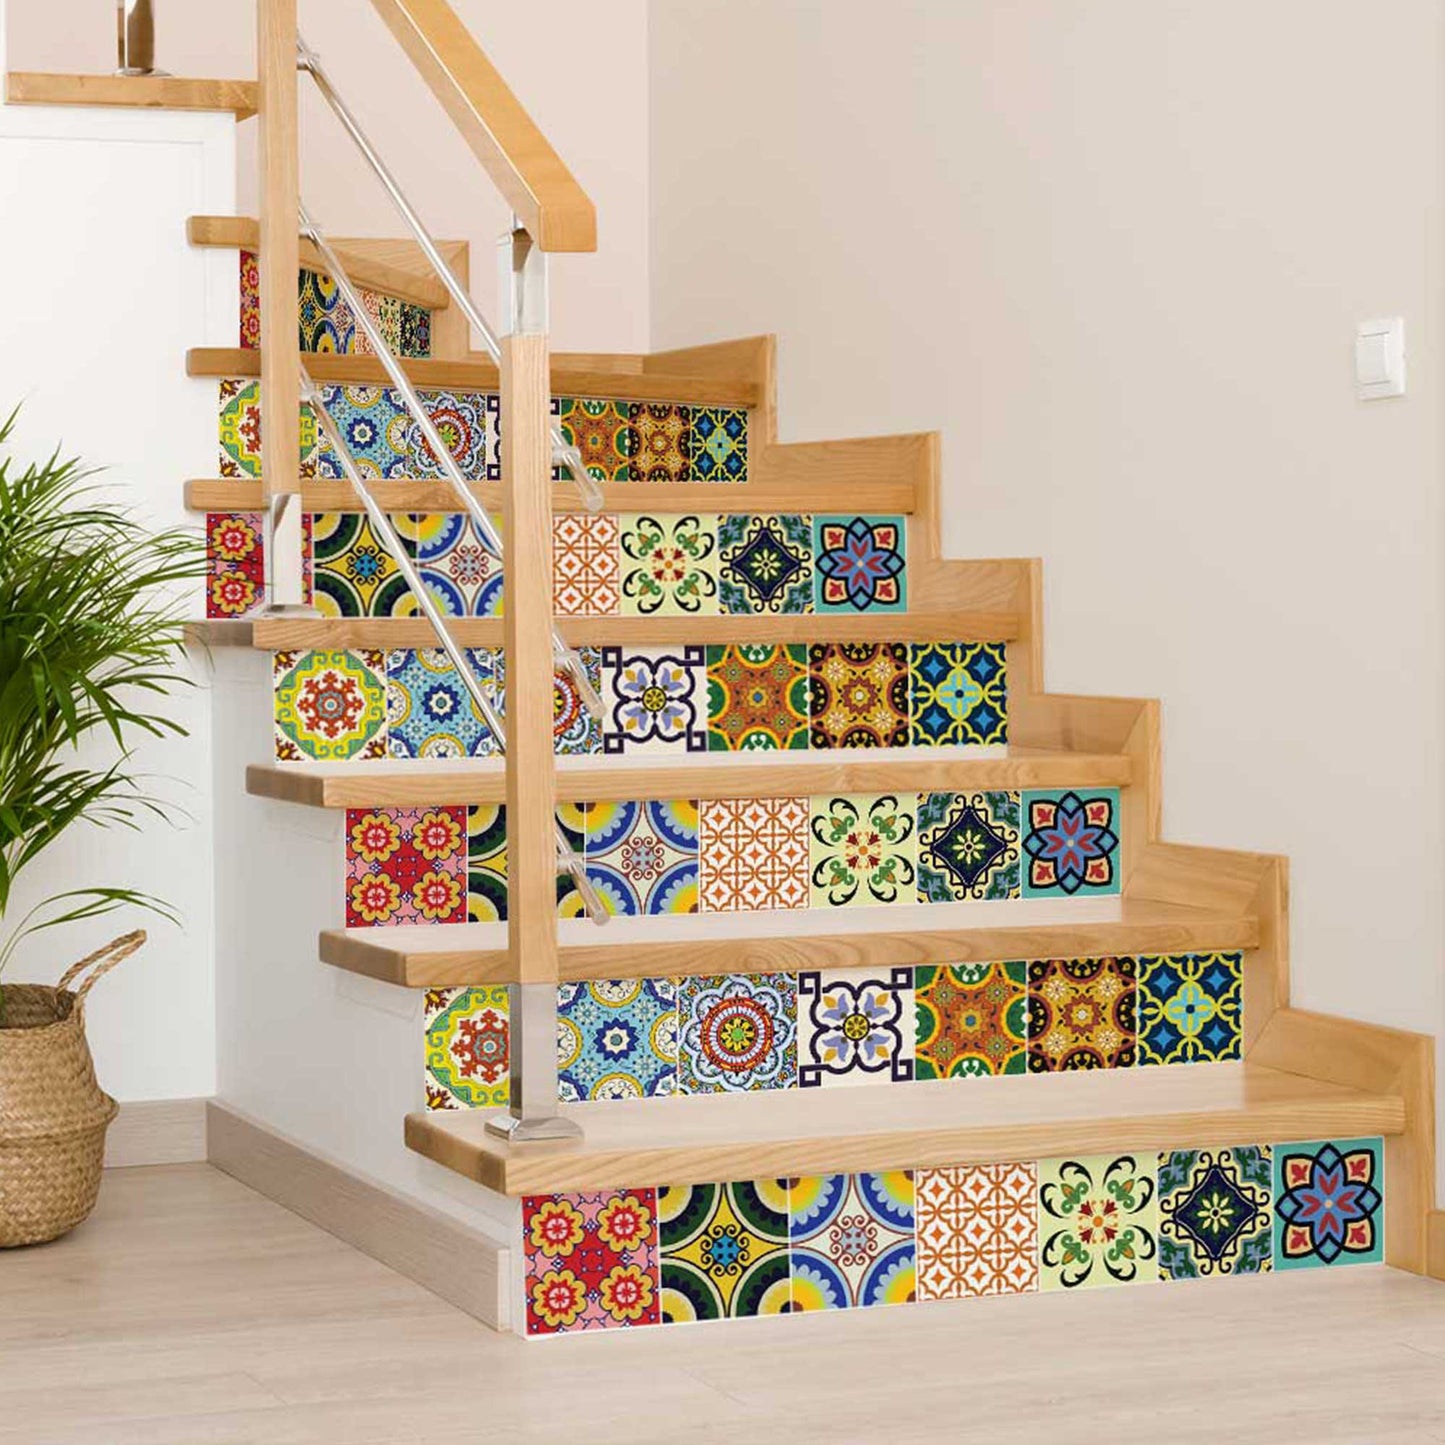 5" X 5" Mediterranean Brights Peel And Stick Removable Tiles